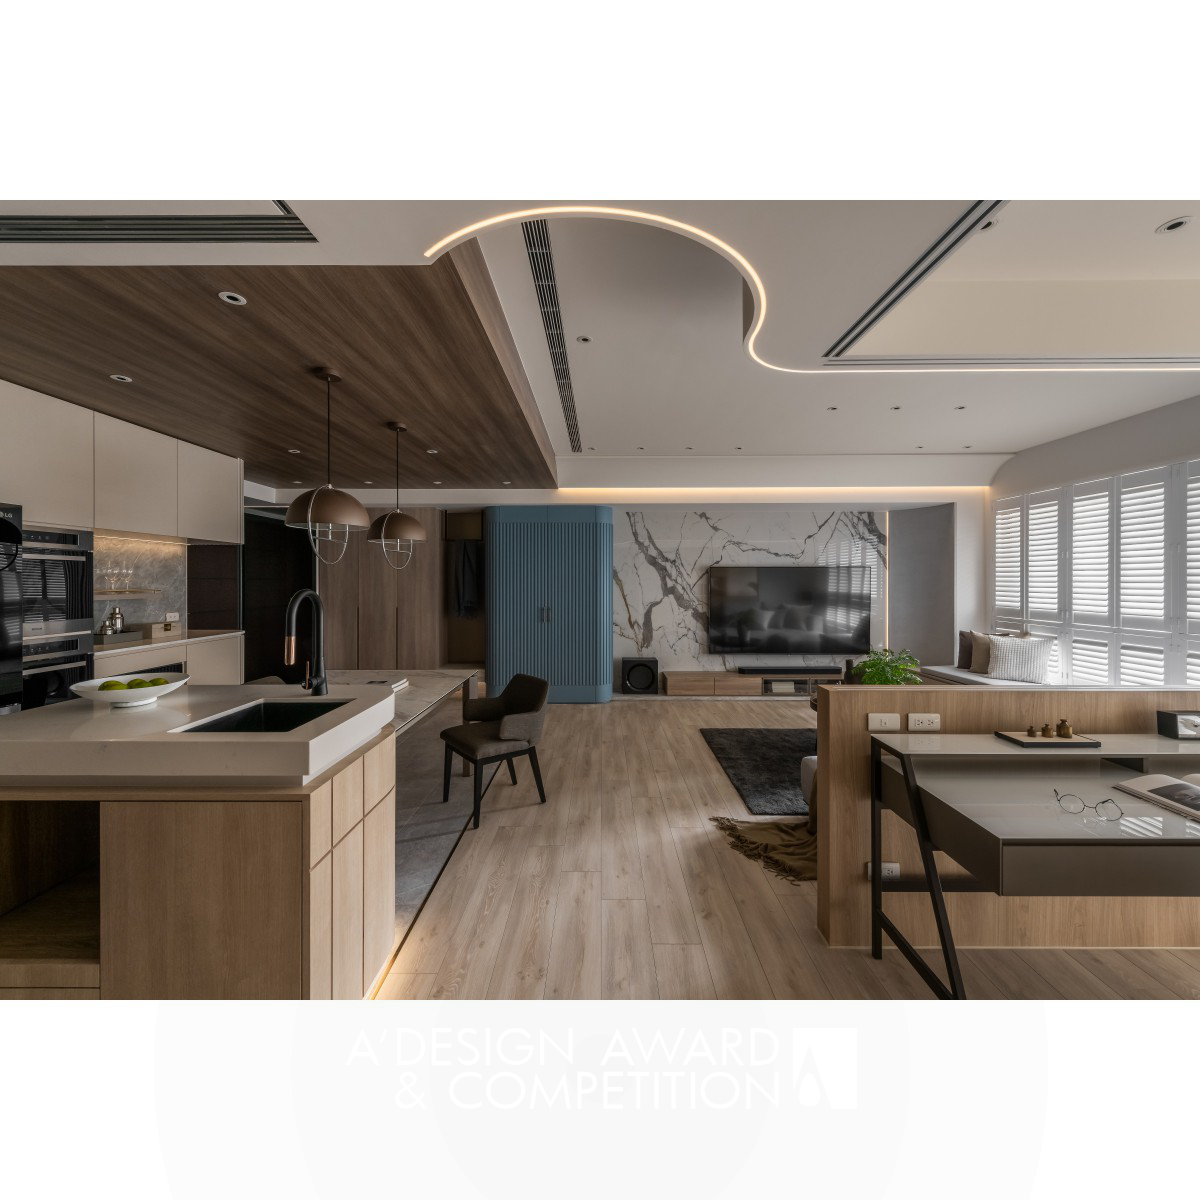 Chung Yi Chun wins Bronze at the prestigious A' Interior Space, Retail and Exhibition Design Award with Confluence of Initial Intentions Residential House.